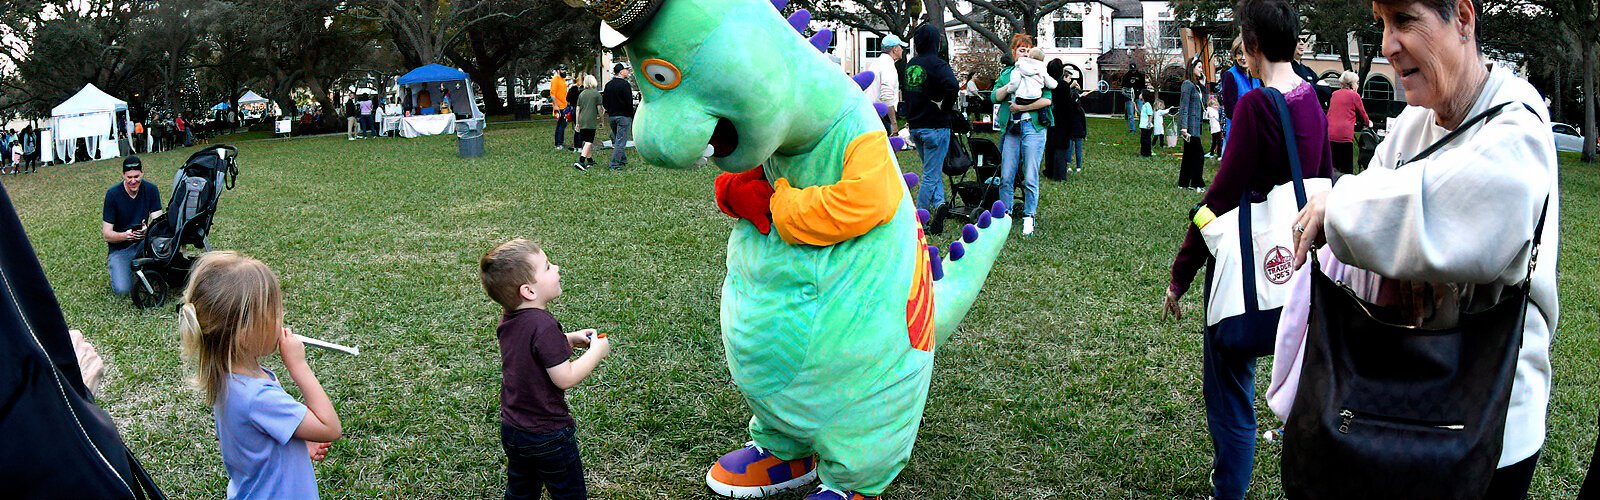 A little boy is not shy about meeting Morris the Explorasaurus from the Great Explorations Children’s Museum, who is roaming around North Straub Park looking for friends.